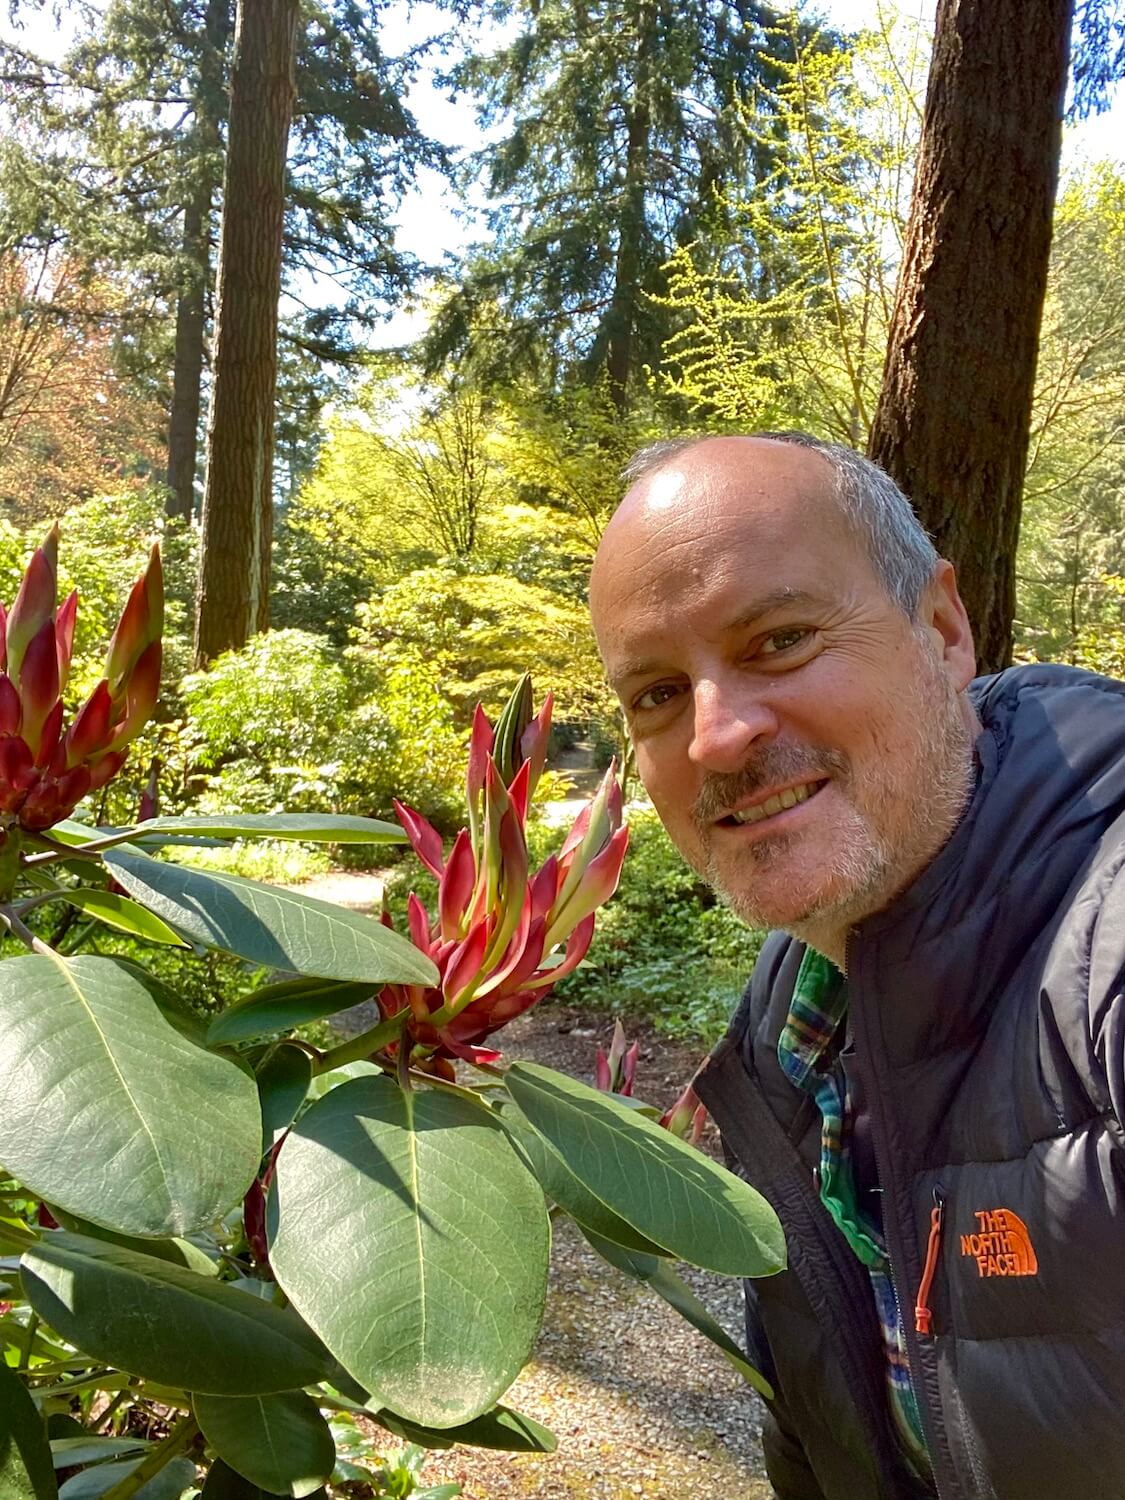 Matthew Kessi poses for a selfie next to a nearly budding Rhododendron plant, not yet fully formed.  He is smiling and wearing a gray down jacket. 